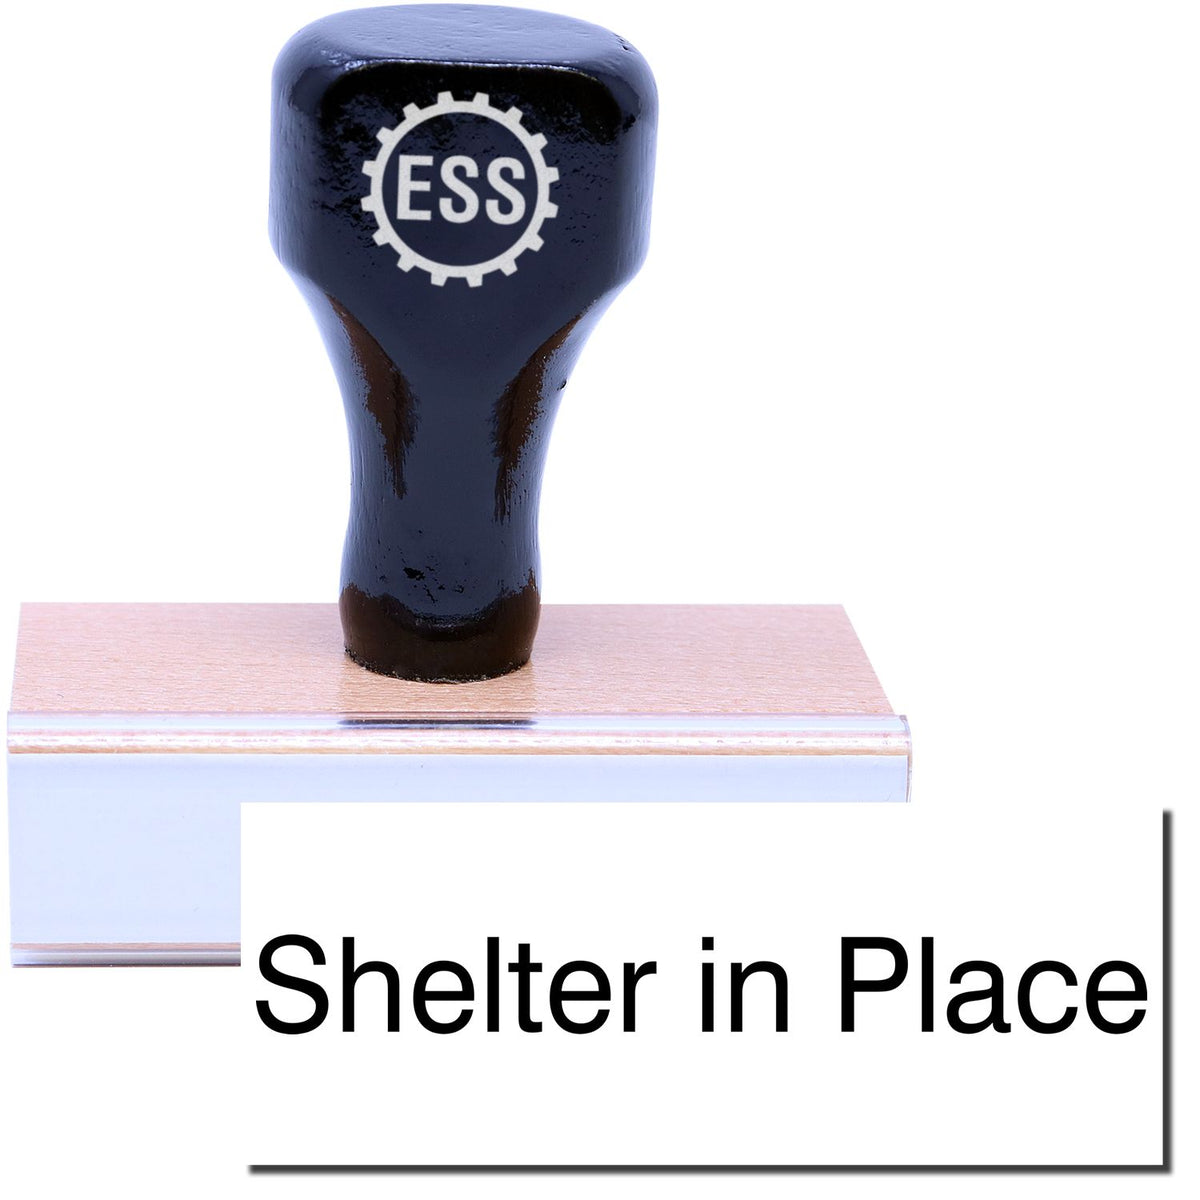 A stock office rubber stamp with a stamped image showing how the text &quot;Shelter in Place&quot; in a large font is displayed after stamping.